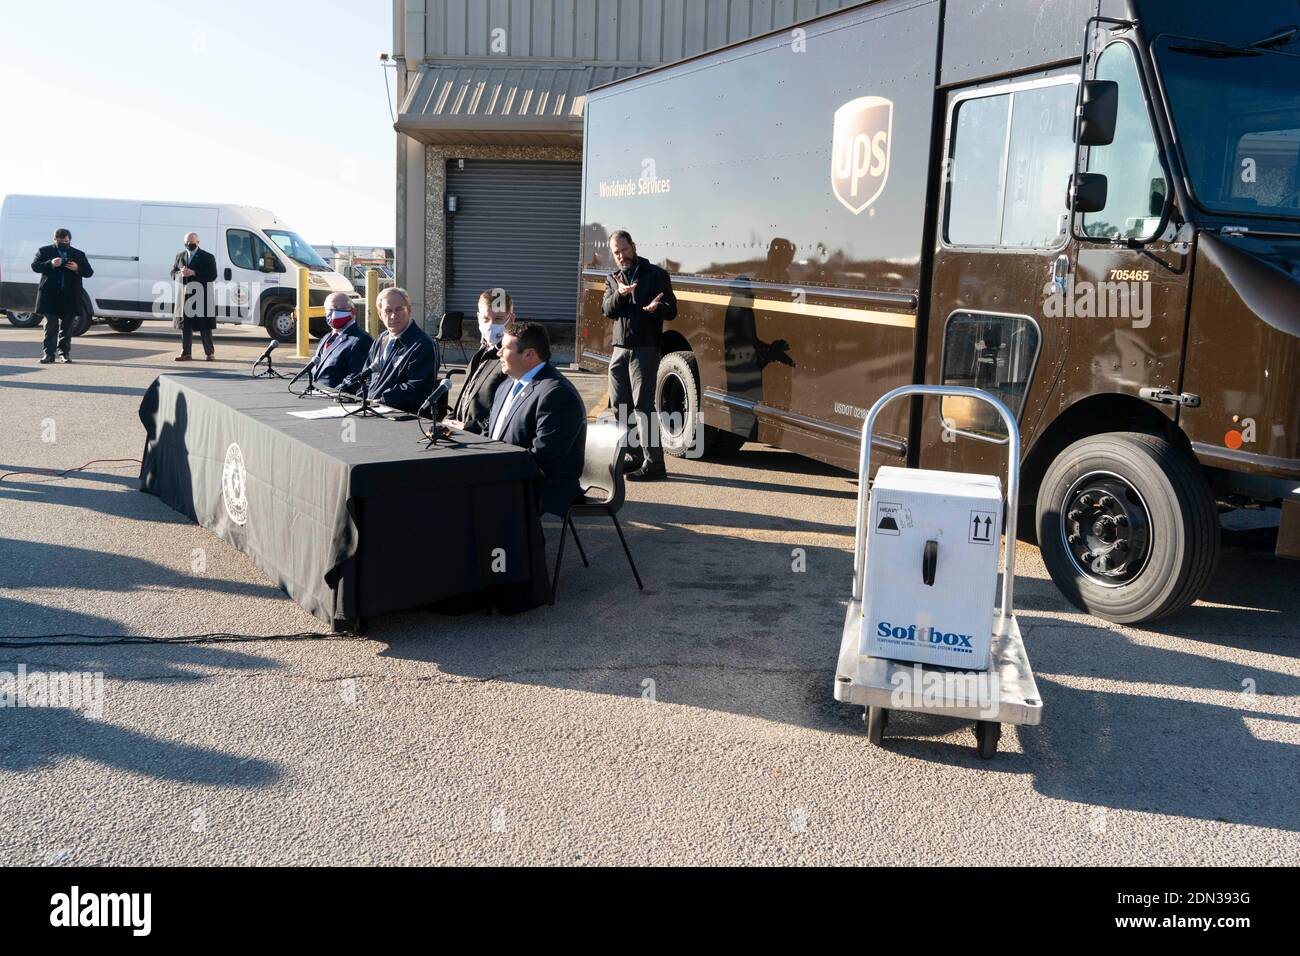 Austin, TX USA December 17, 2020: A box with 5,000 doses of vaccine awaits delivery as Texas Governor Greg Abbott (at table in background) talks at a UPS facility about Texas' receiving its first shipments of the Pfizer BioNTech anti-coronavirus vaccine. Thousands of Texans are expected to be vaccinated over the coming days. Credit: Bob Daemmrich/Alamy Live News Stock Photo